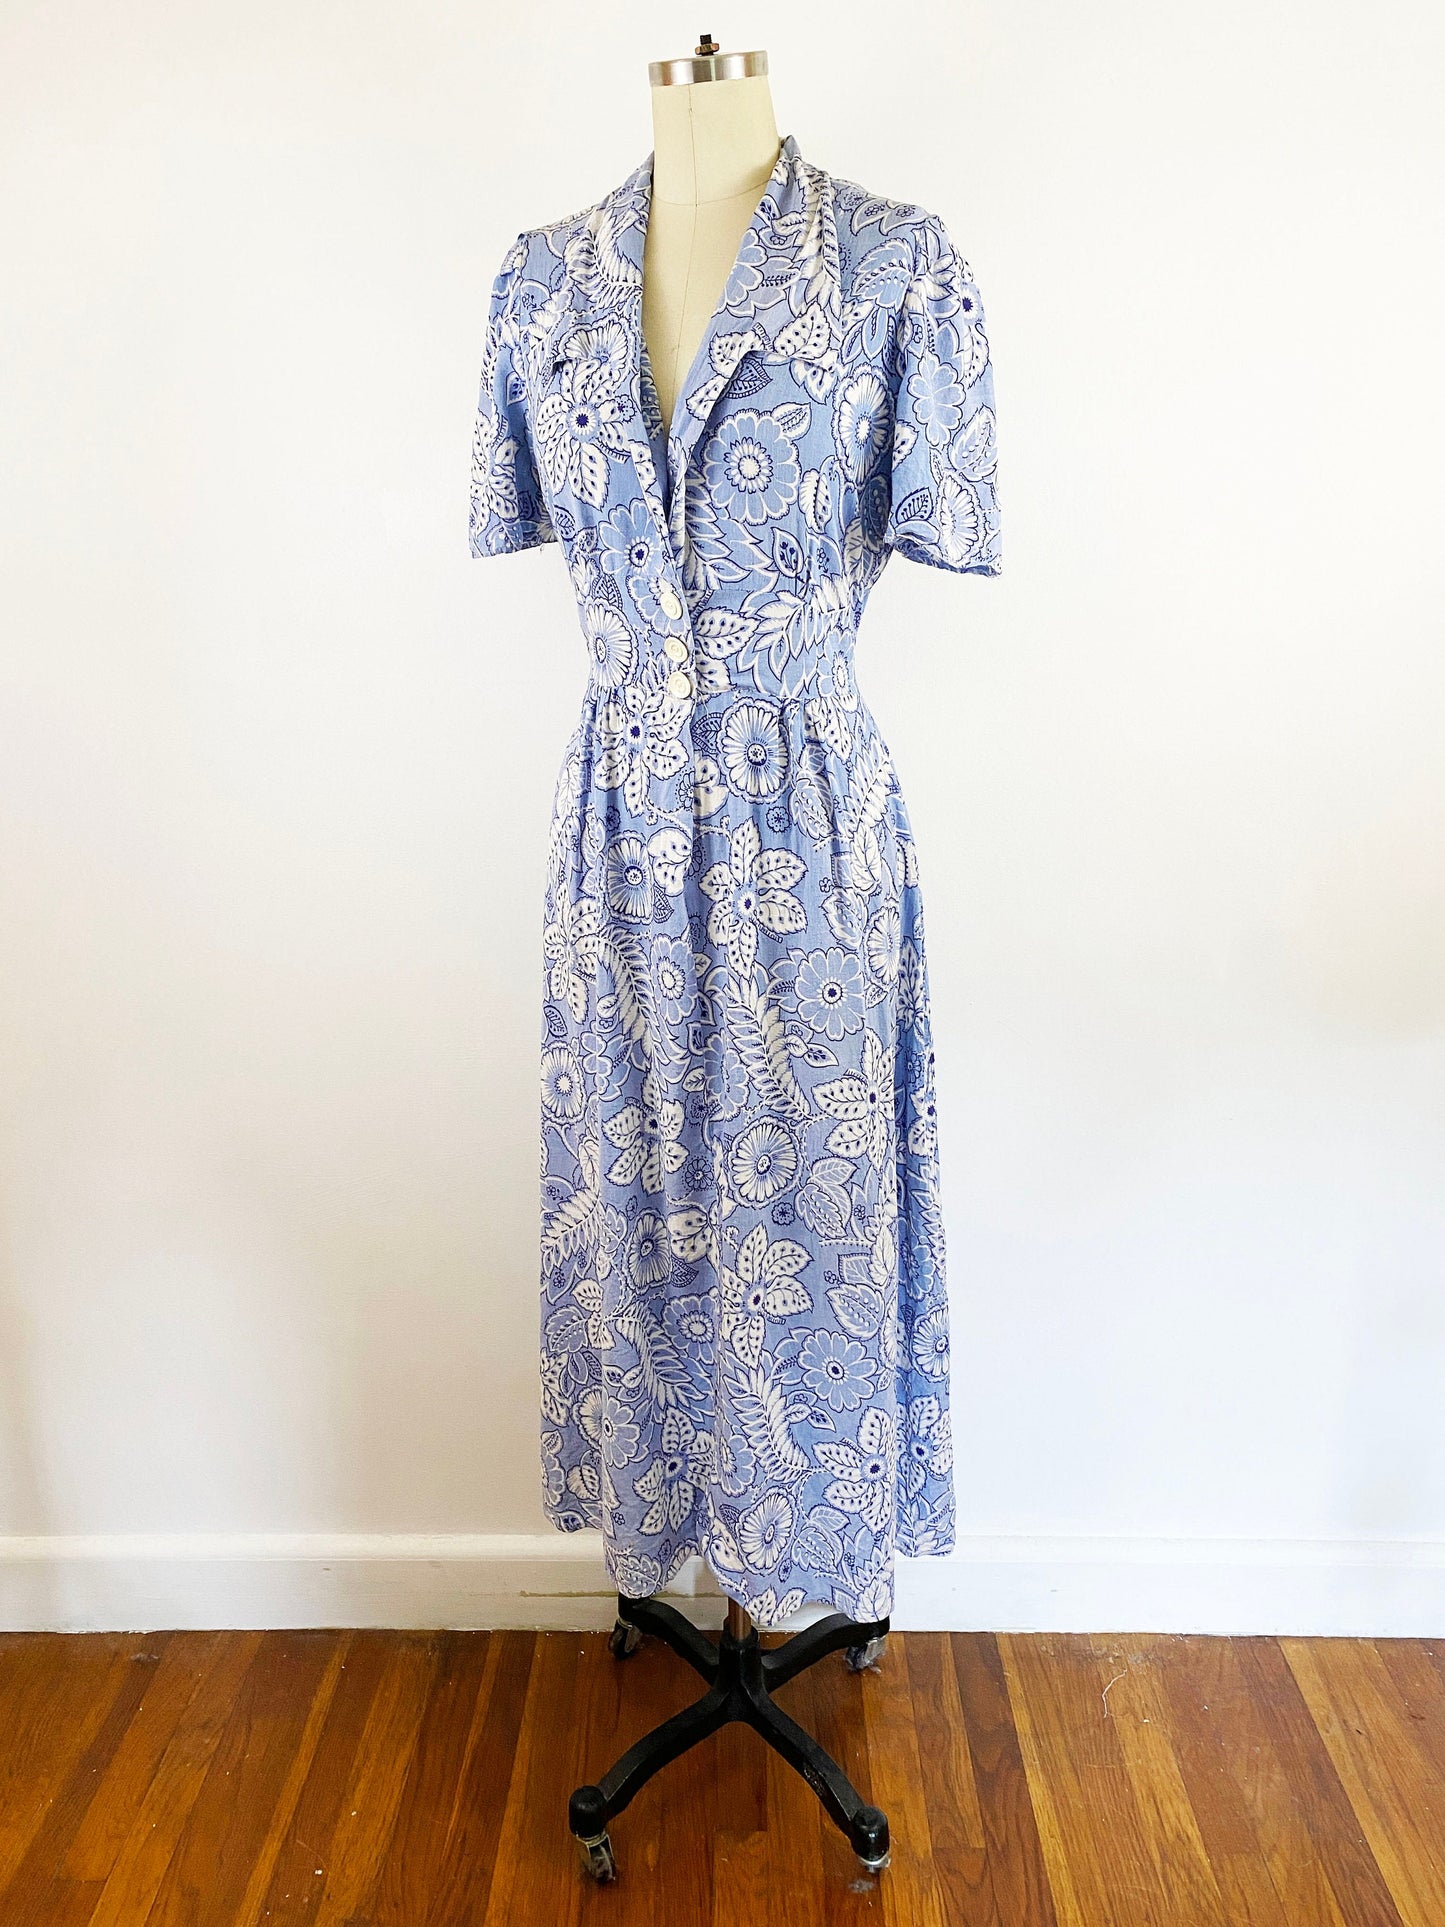 1930-1940s Light Blue and White Floral Cotton Bias Day Dress Vintage Cute Sweet Retro Pin Up House Dress Feed Sack / Size Medium 10